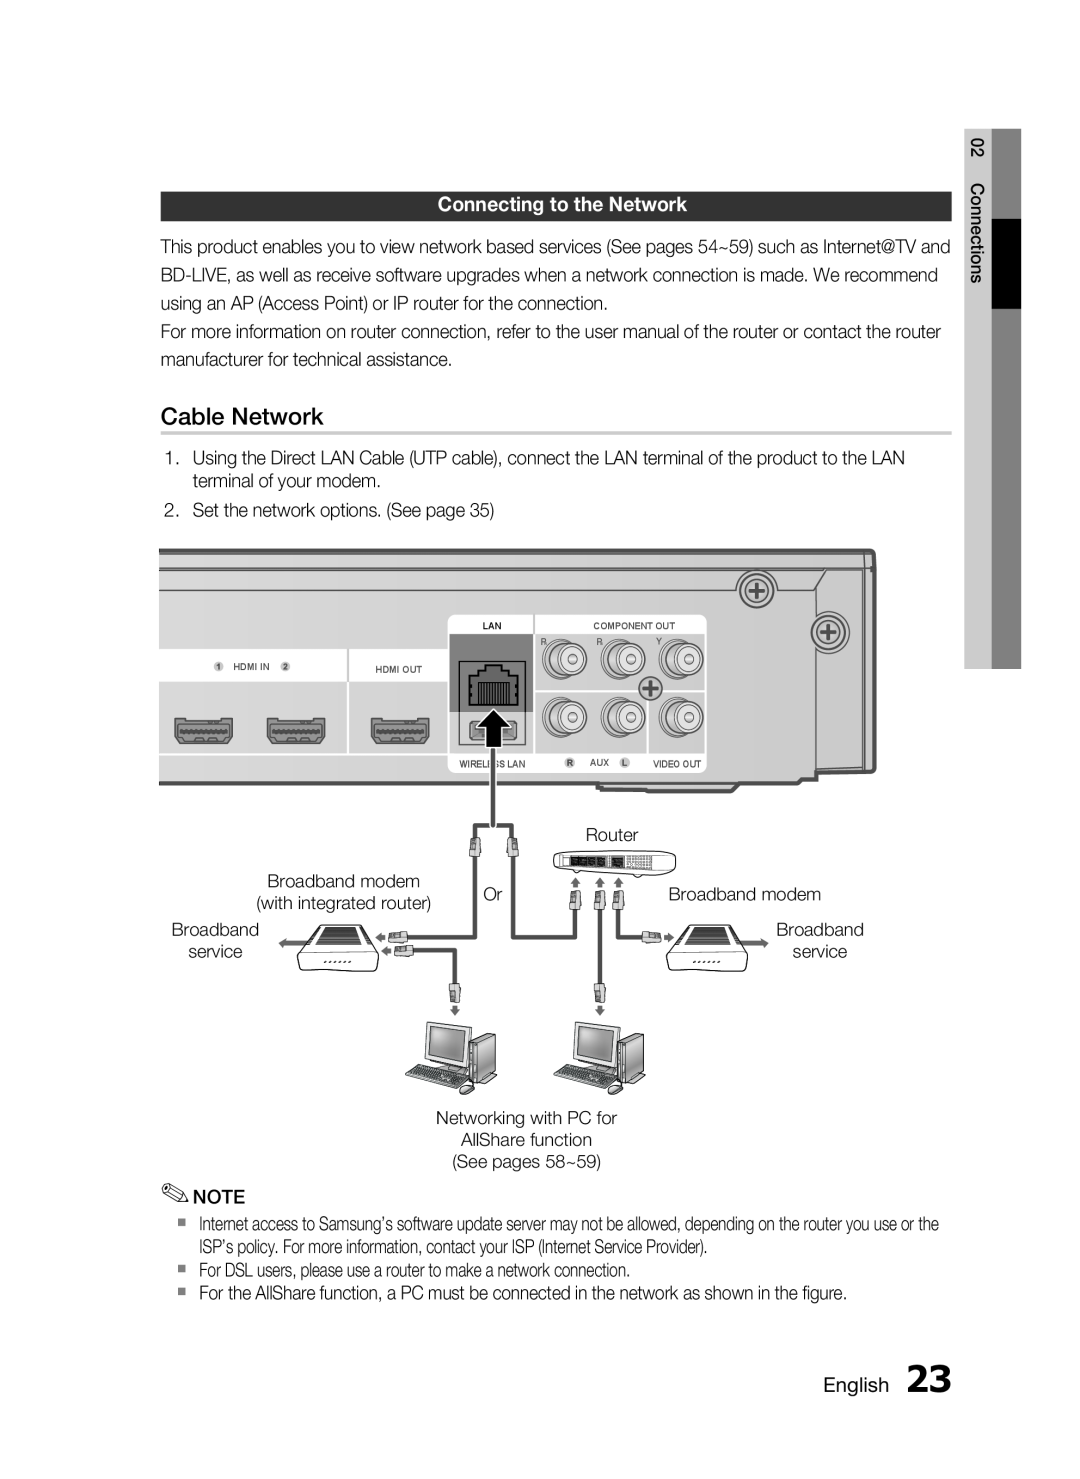 Samsung HT-C5200 user manual Cable Network, Connecting to the Network, English 